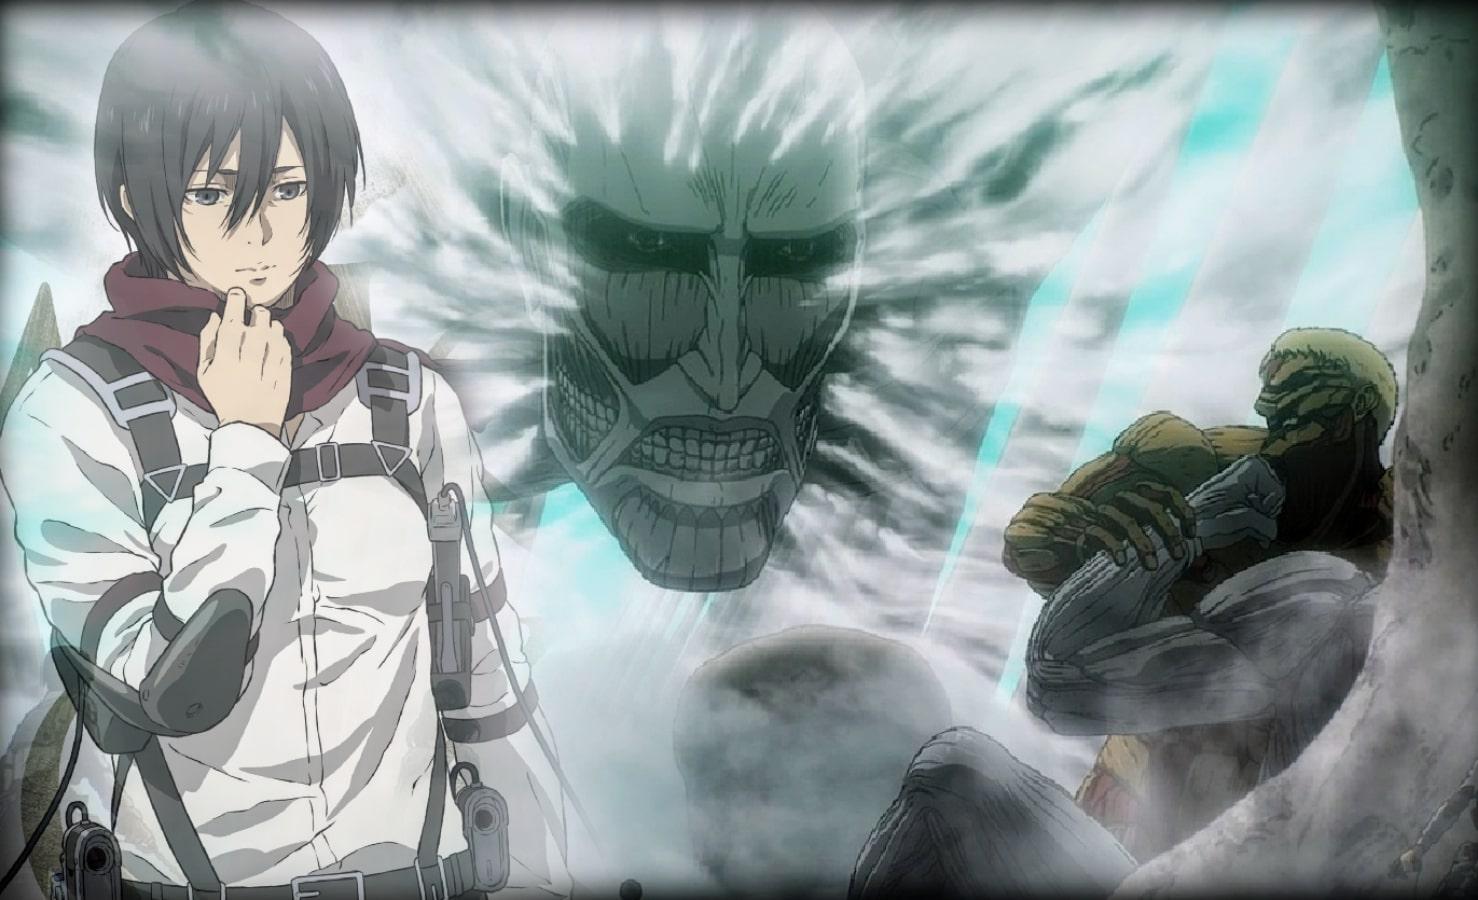 10 Things The Attack On Titan Manga Does Better Than The Anime